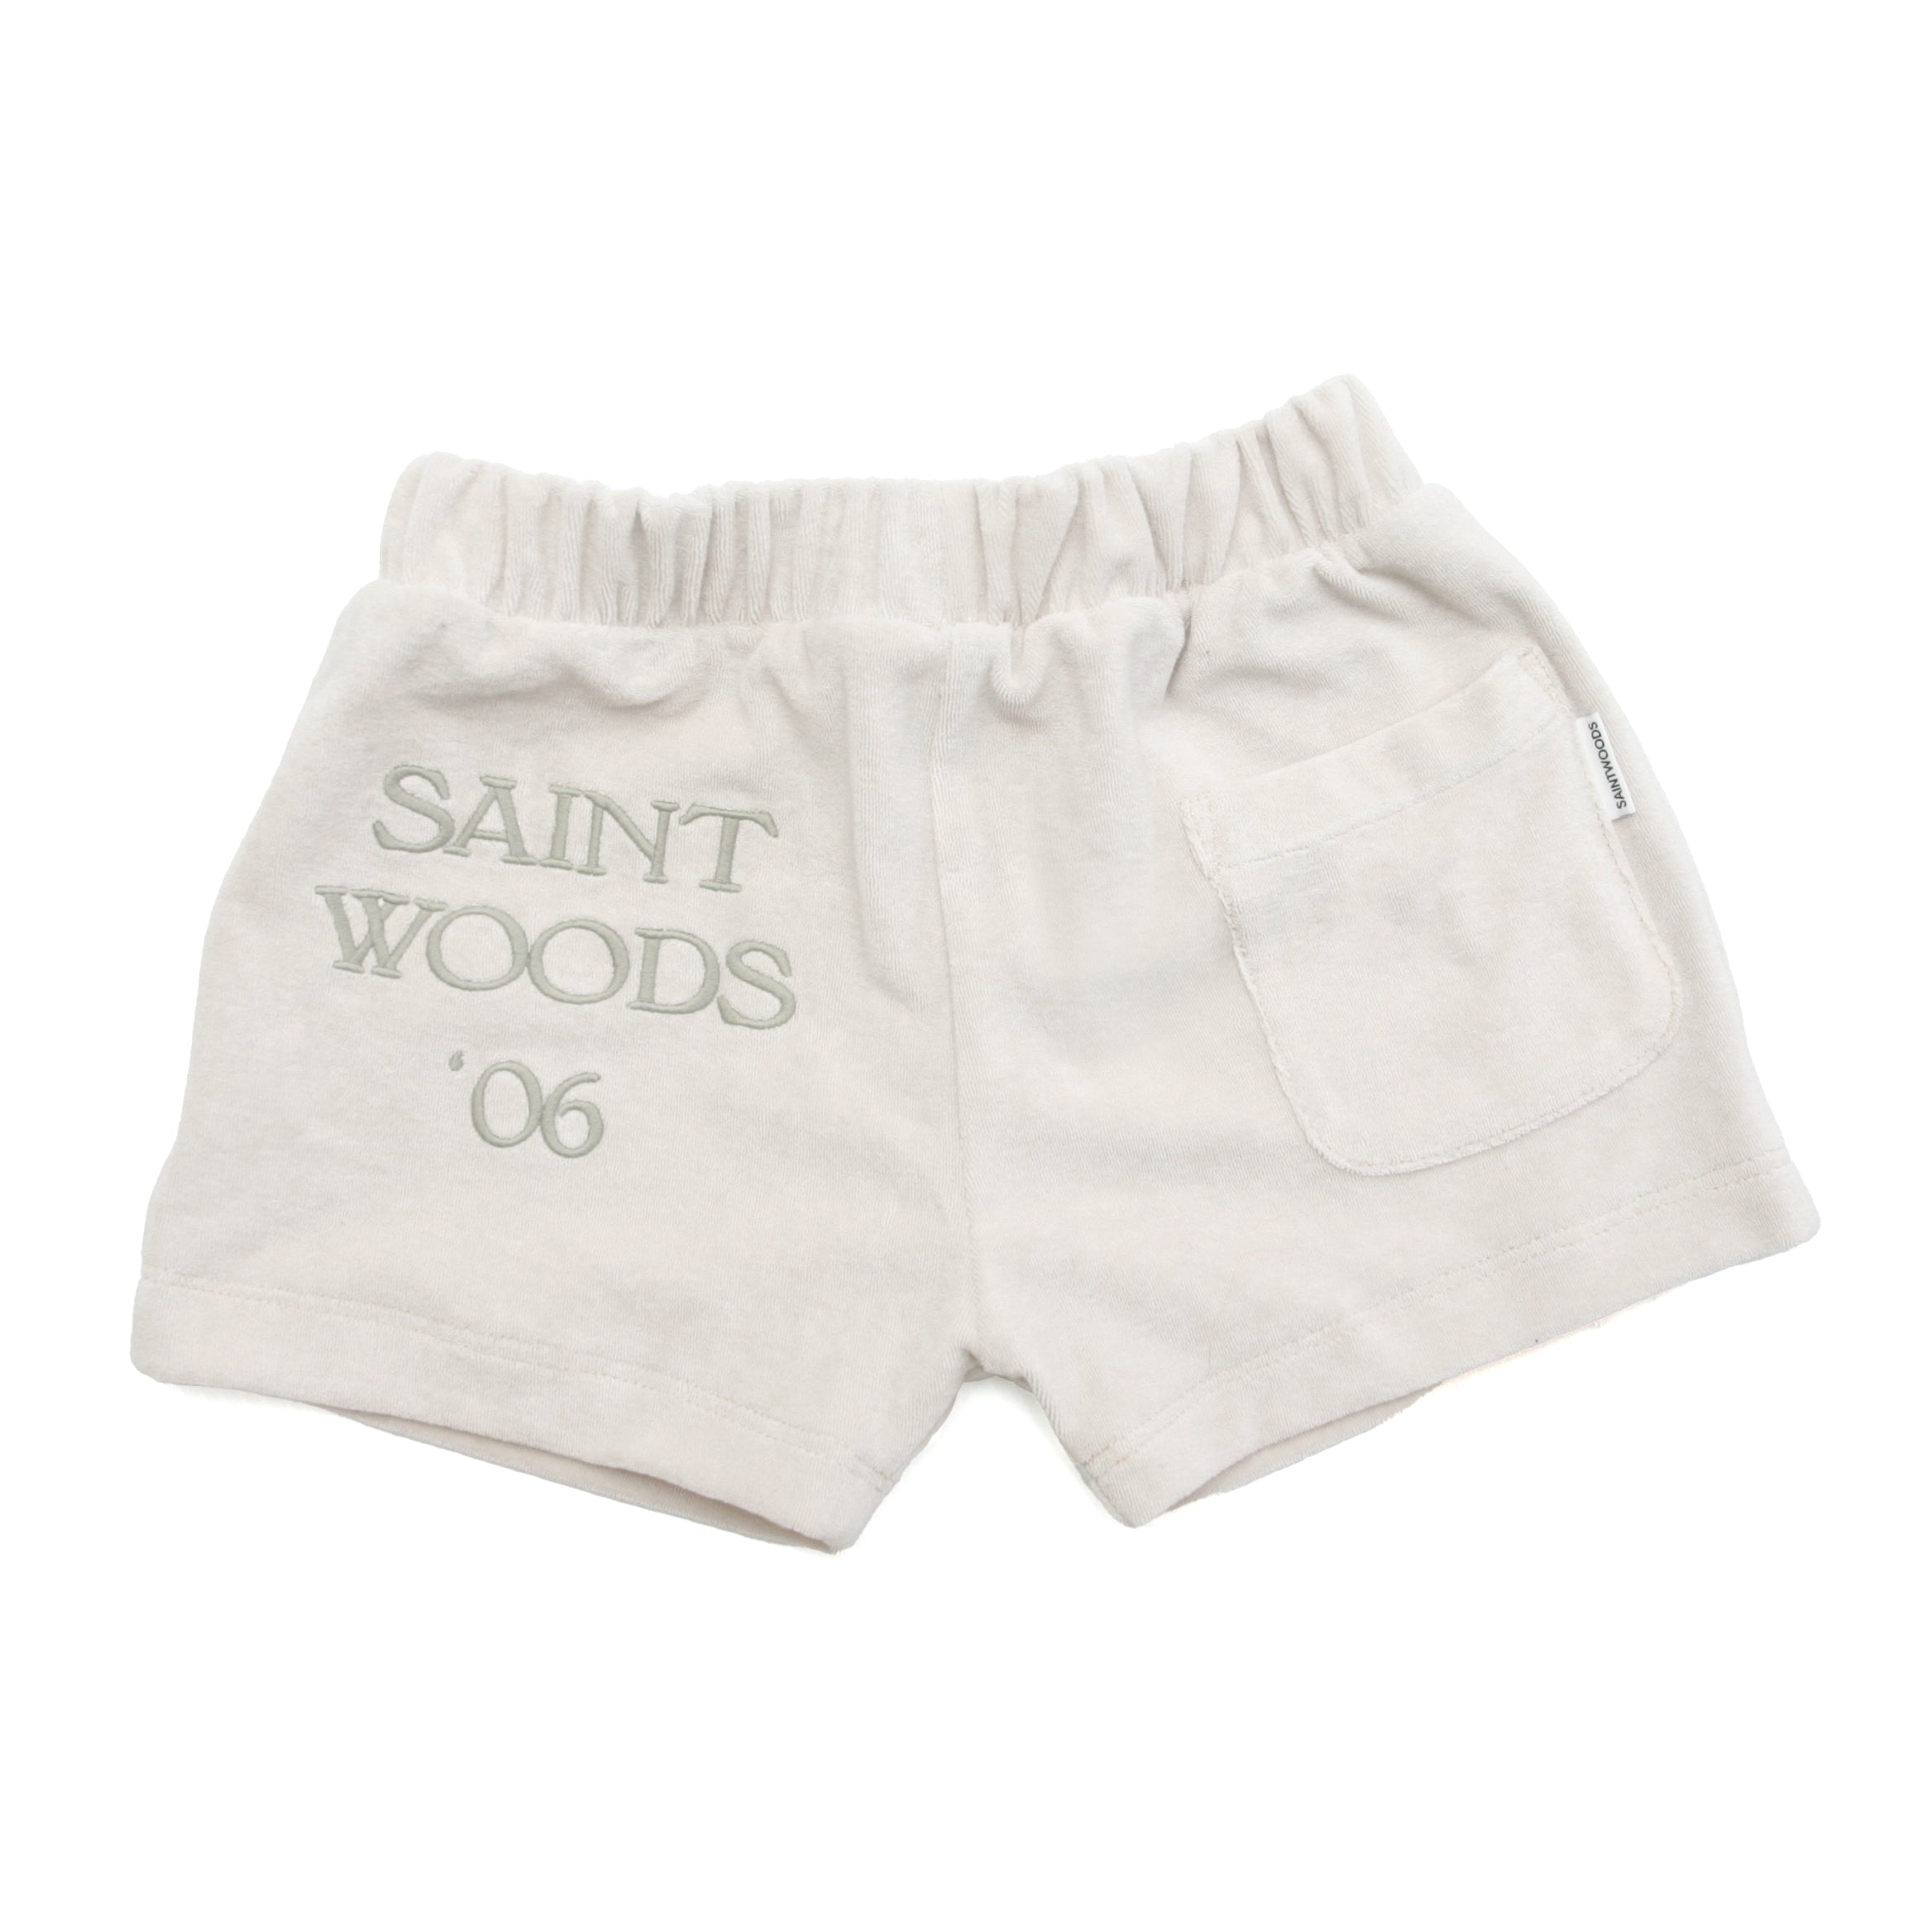 SW WORLD "Since 2006" Terry Cotton Short Shorts